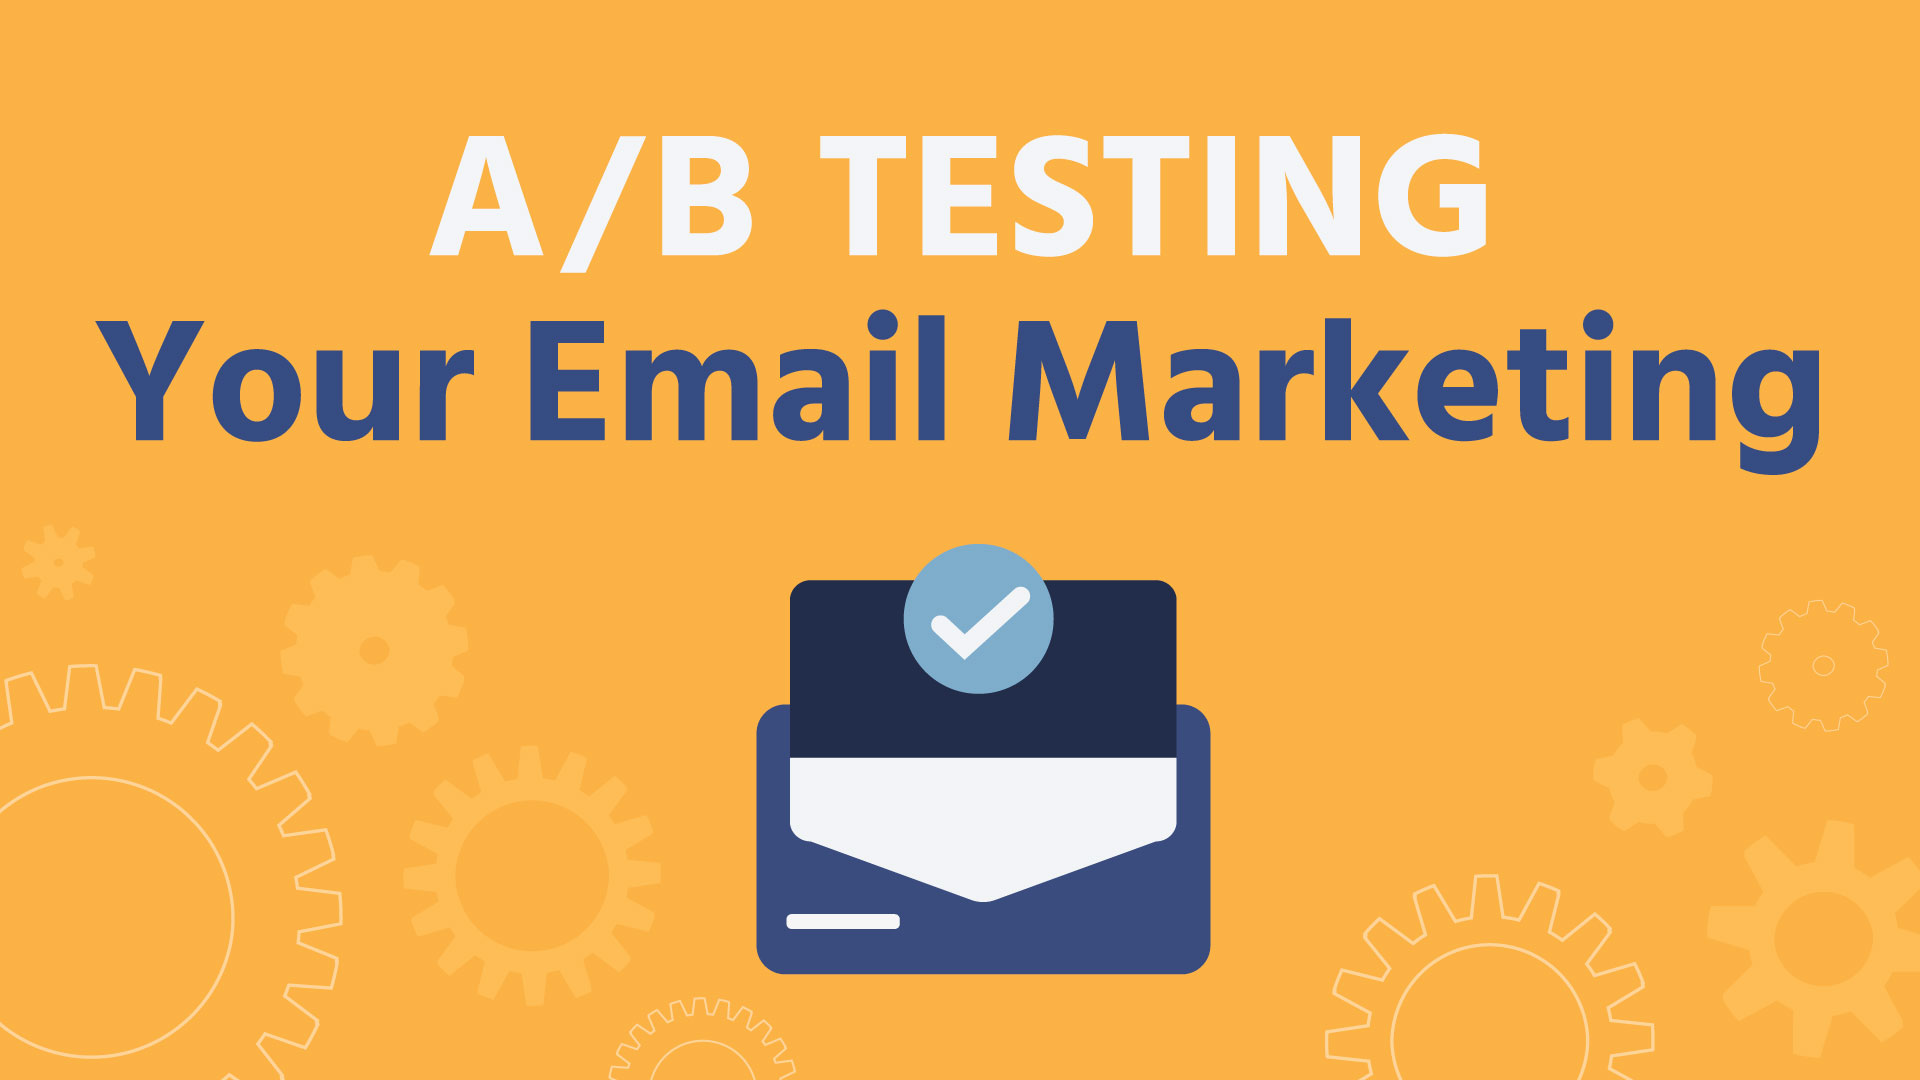 A/B Testing Your Email Marketing